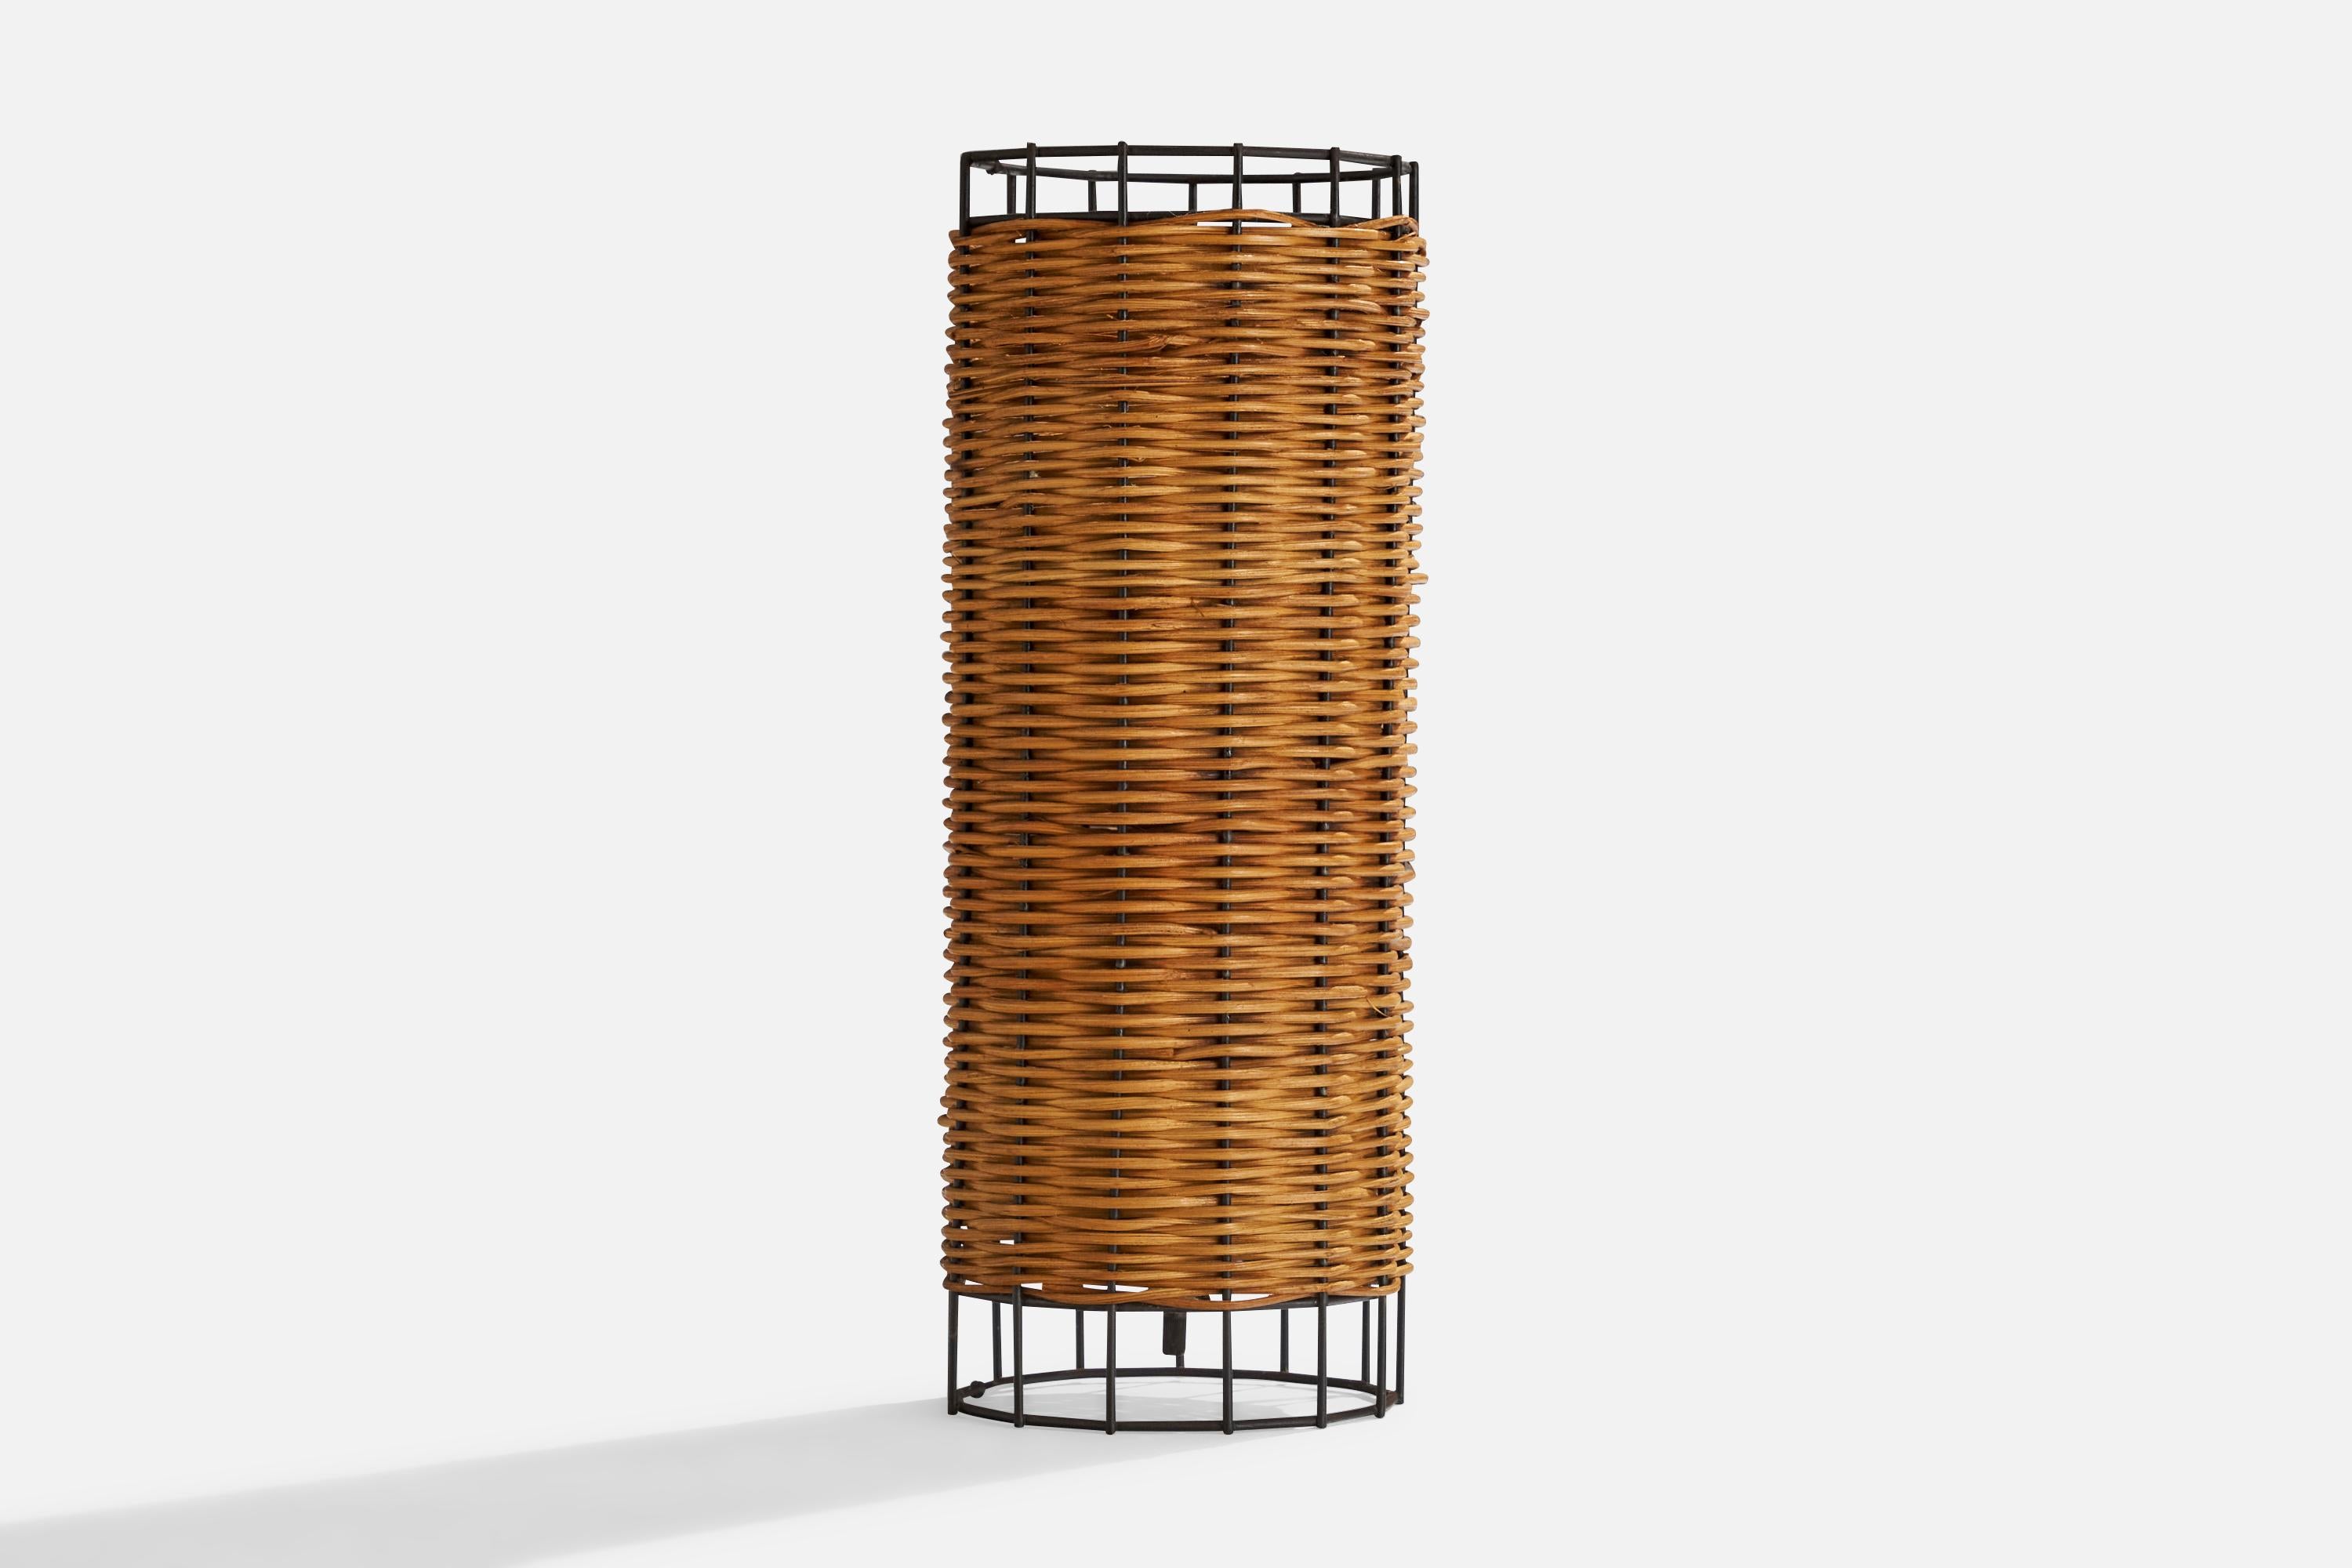 A rattan and black-lacquered metal table lamp designed and produced in the US, c. 1960s.

Overall Dimensions (inches): 12.25”  H x 4.5”  D
Stated dimensions include shade.
Bulb Specifications: E-26 Bulb
Number of Sockets: 1
All lighting will be